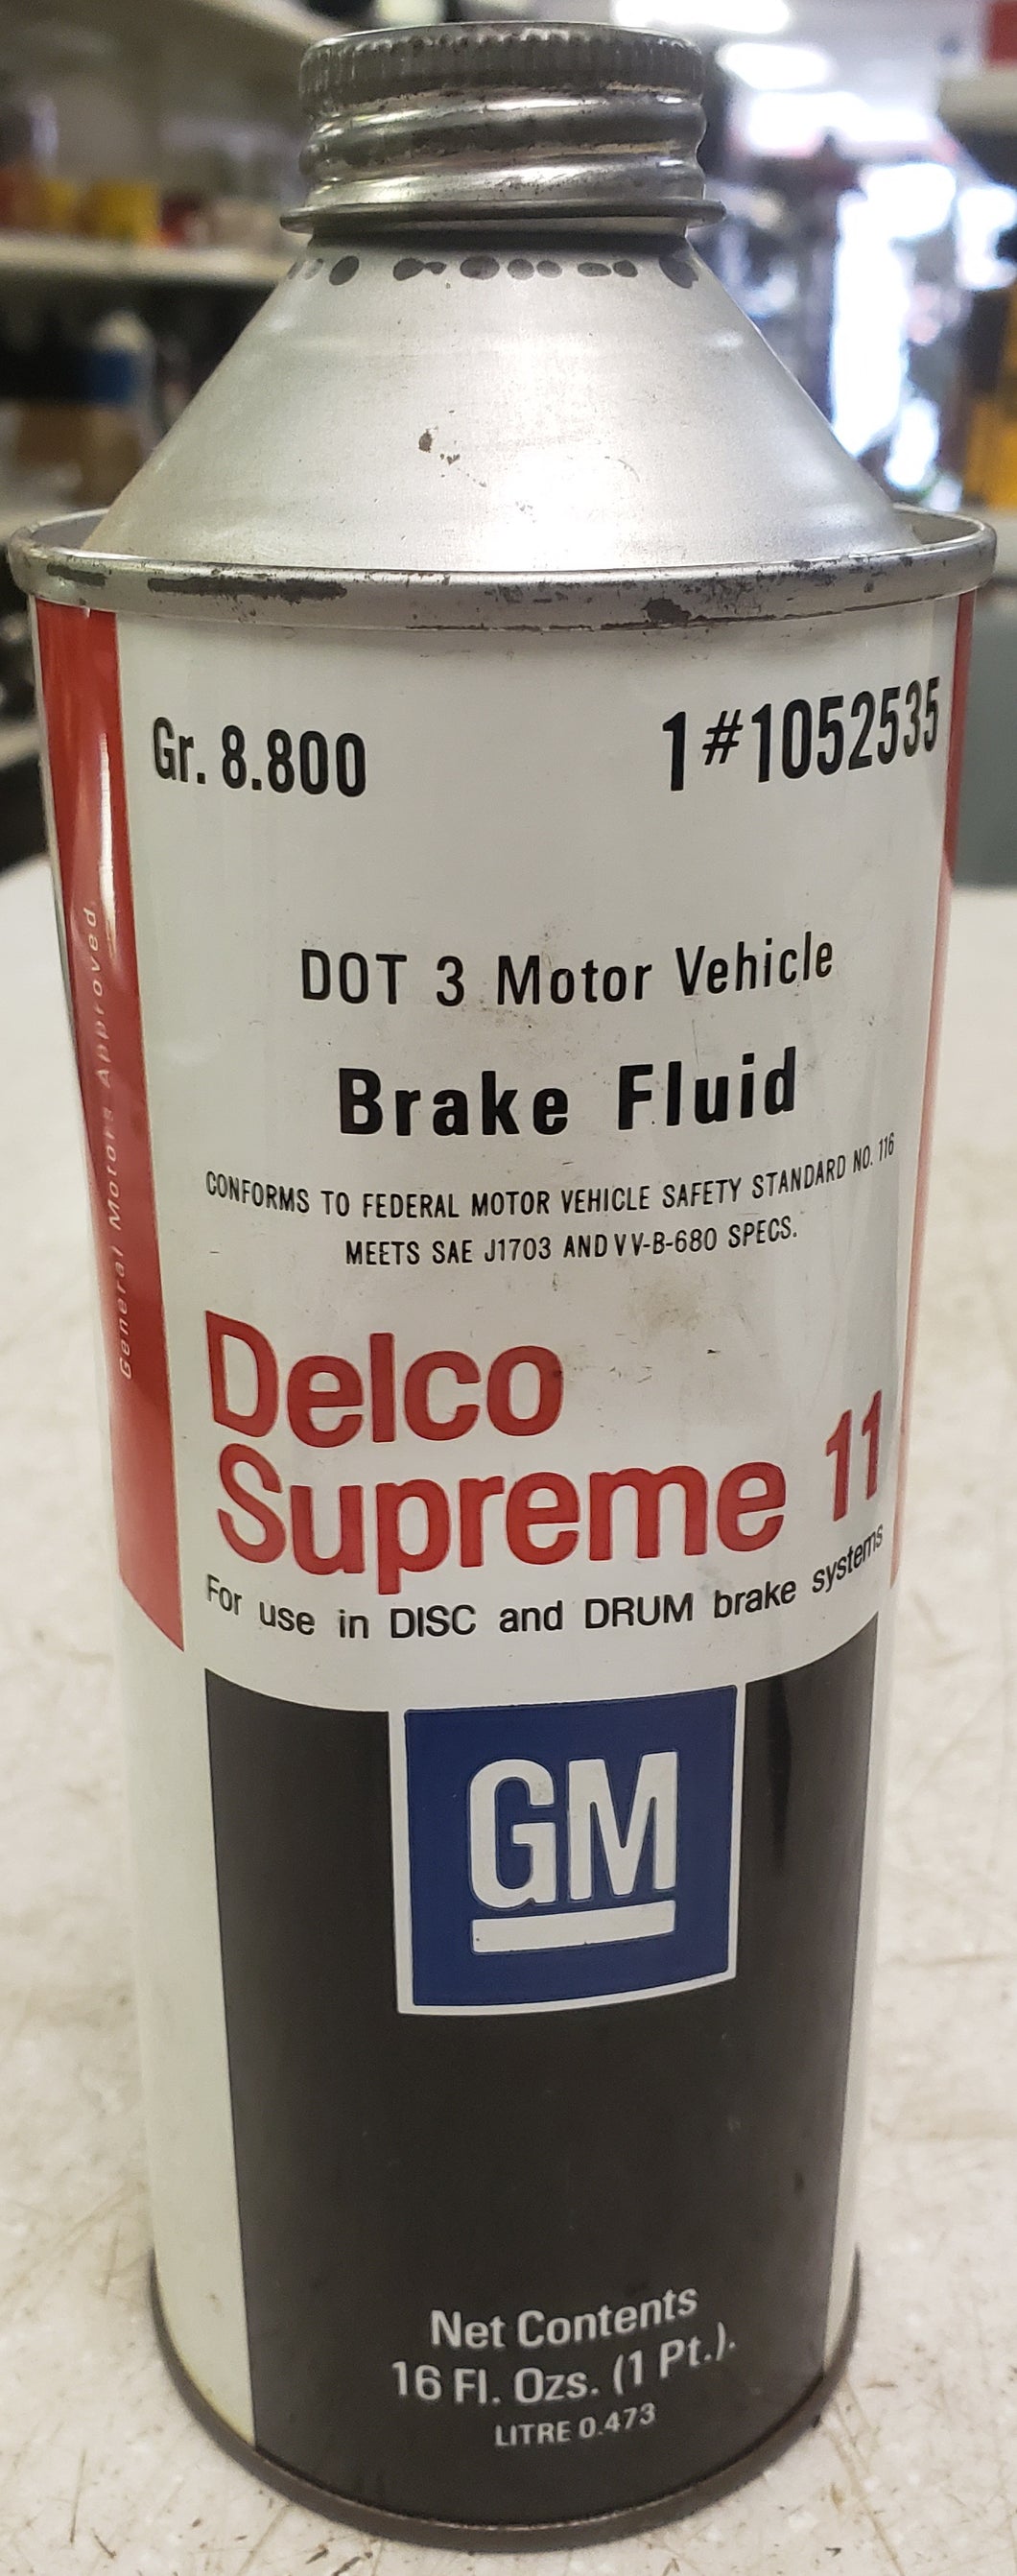 Vintage GM GR. 8.800 1052535 Delco Supreme 11 DOT 3 Brake Fluid (small ding on can)